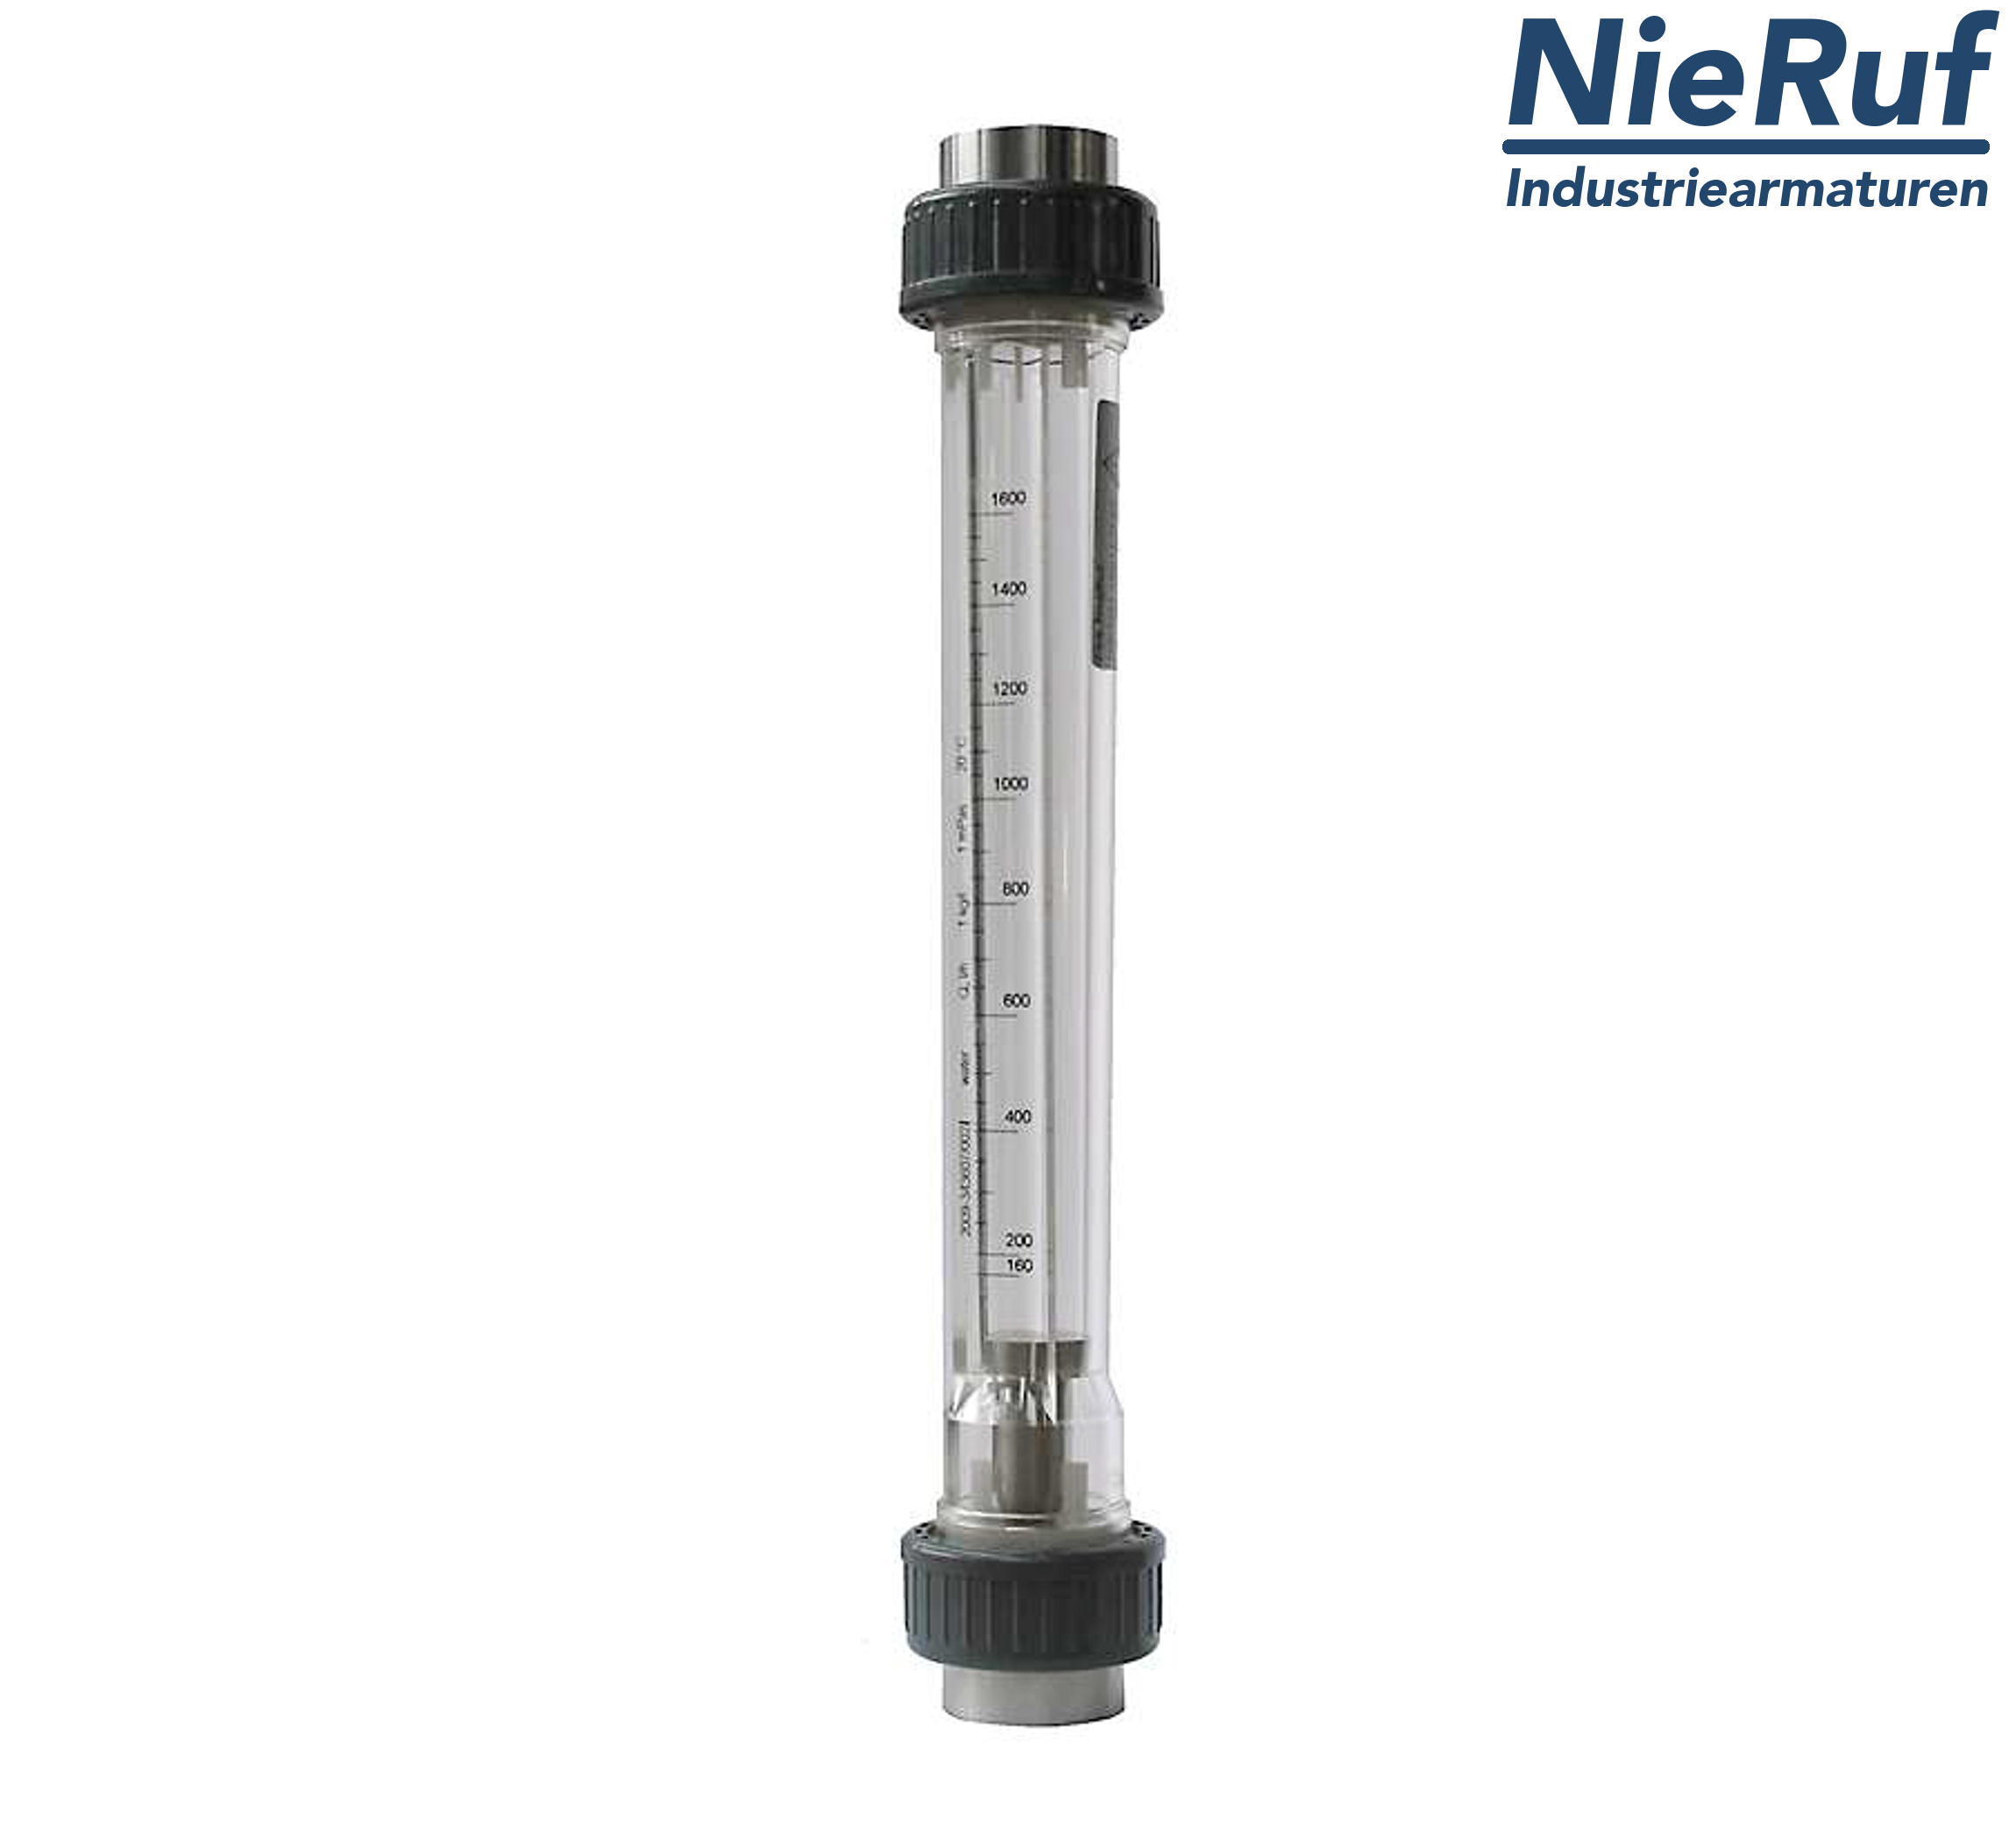 Variable area flowmeter 1" inch 65.0 - 650 l/h water FKM